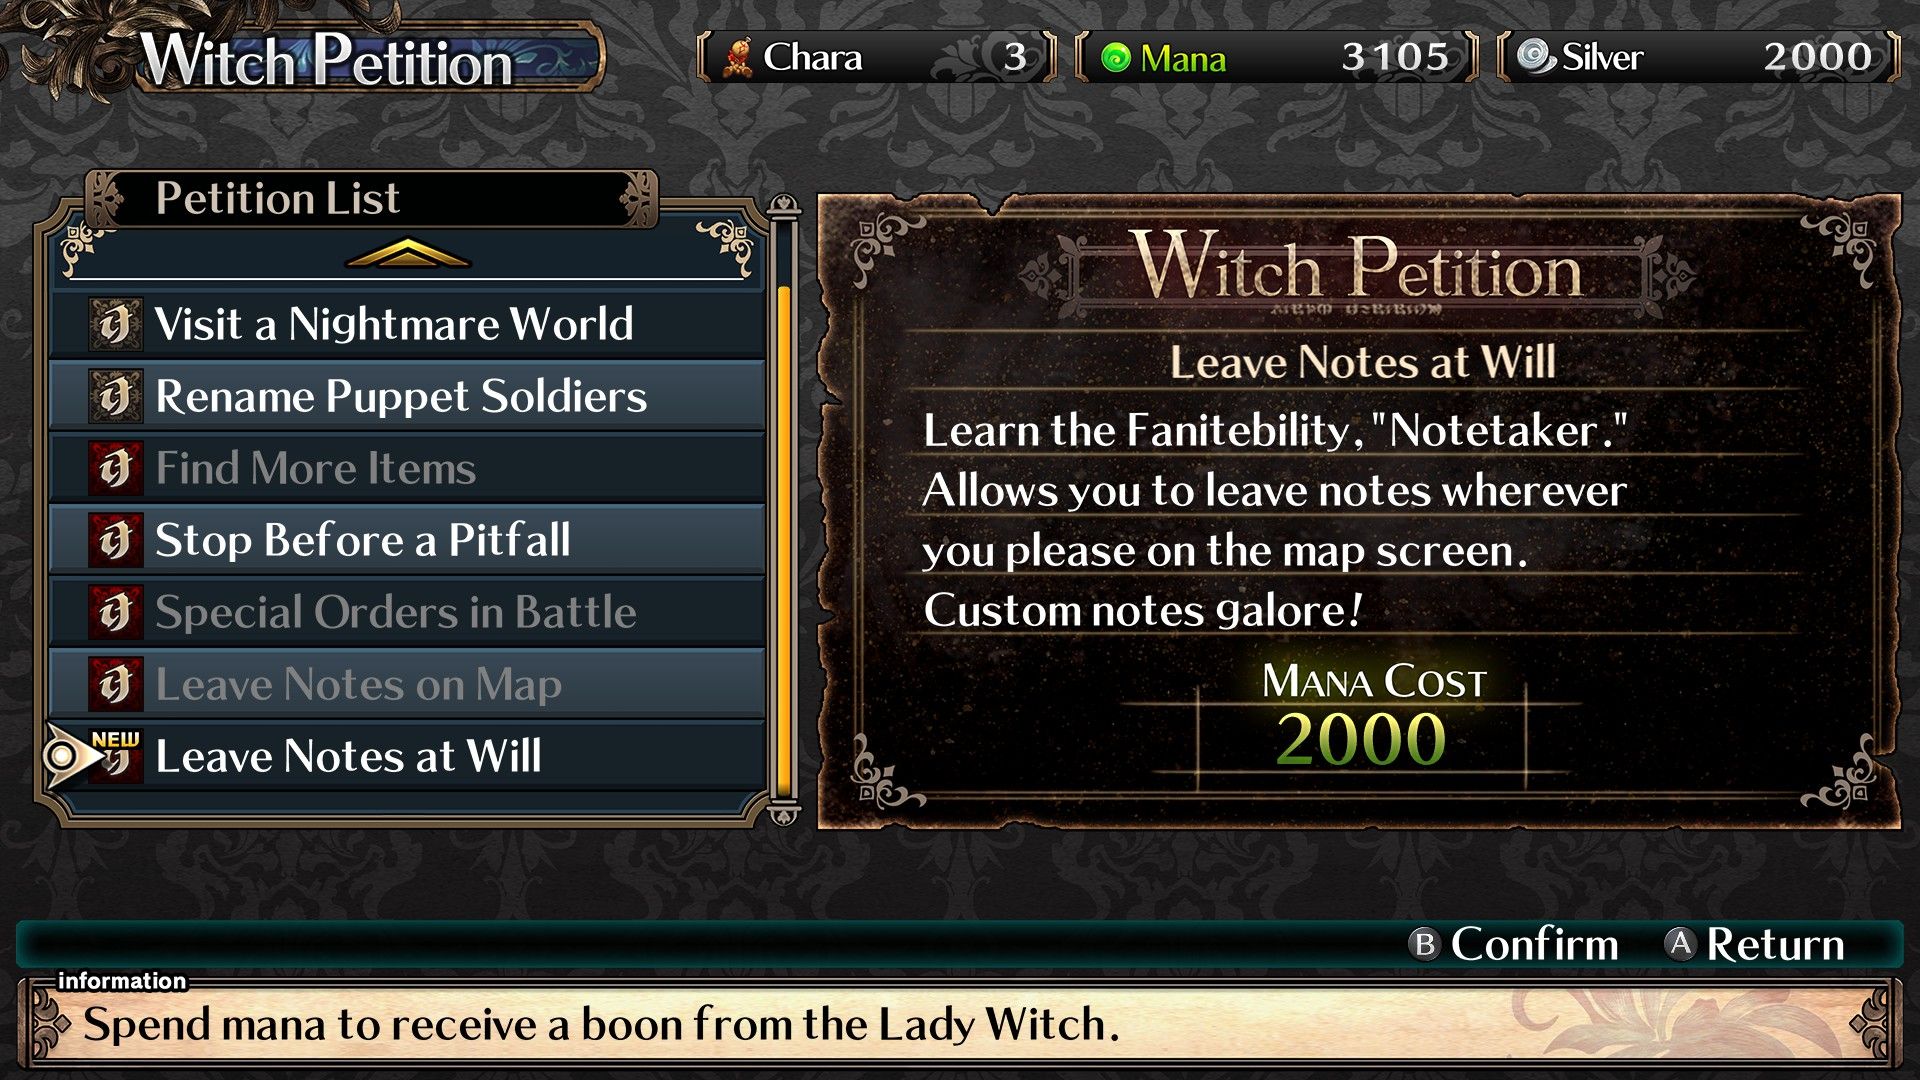 The play considers gettin the Leave Notes at Will ability from the Witch's Petition in Labyrinth Of Galleria: The Moon Society.